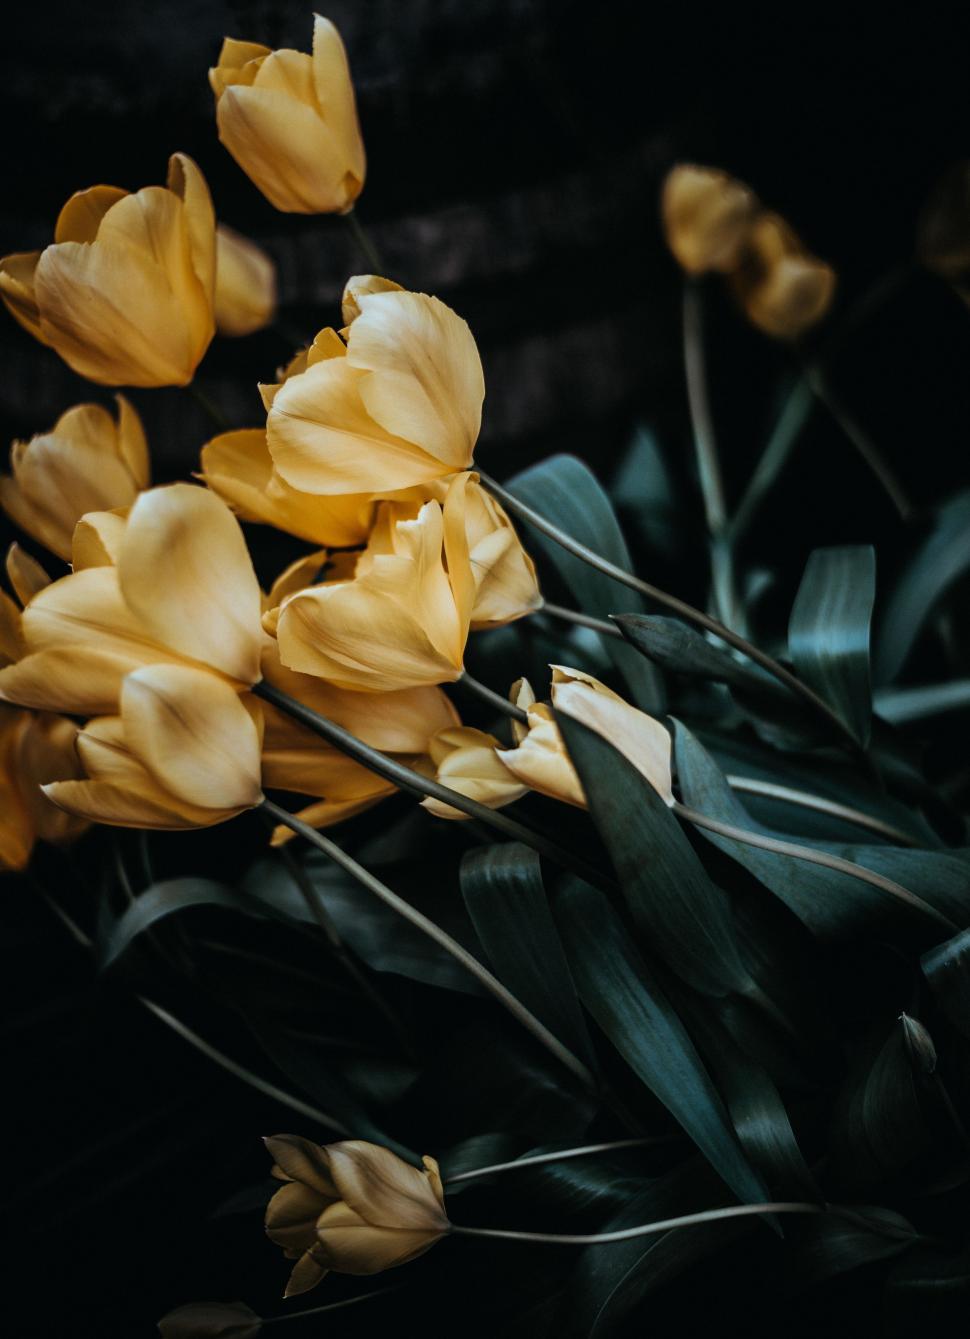 Free Image of Cluster of Yellow Flowers With Green Leaves 